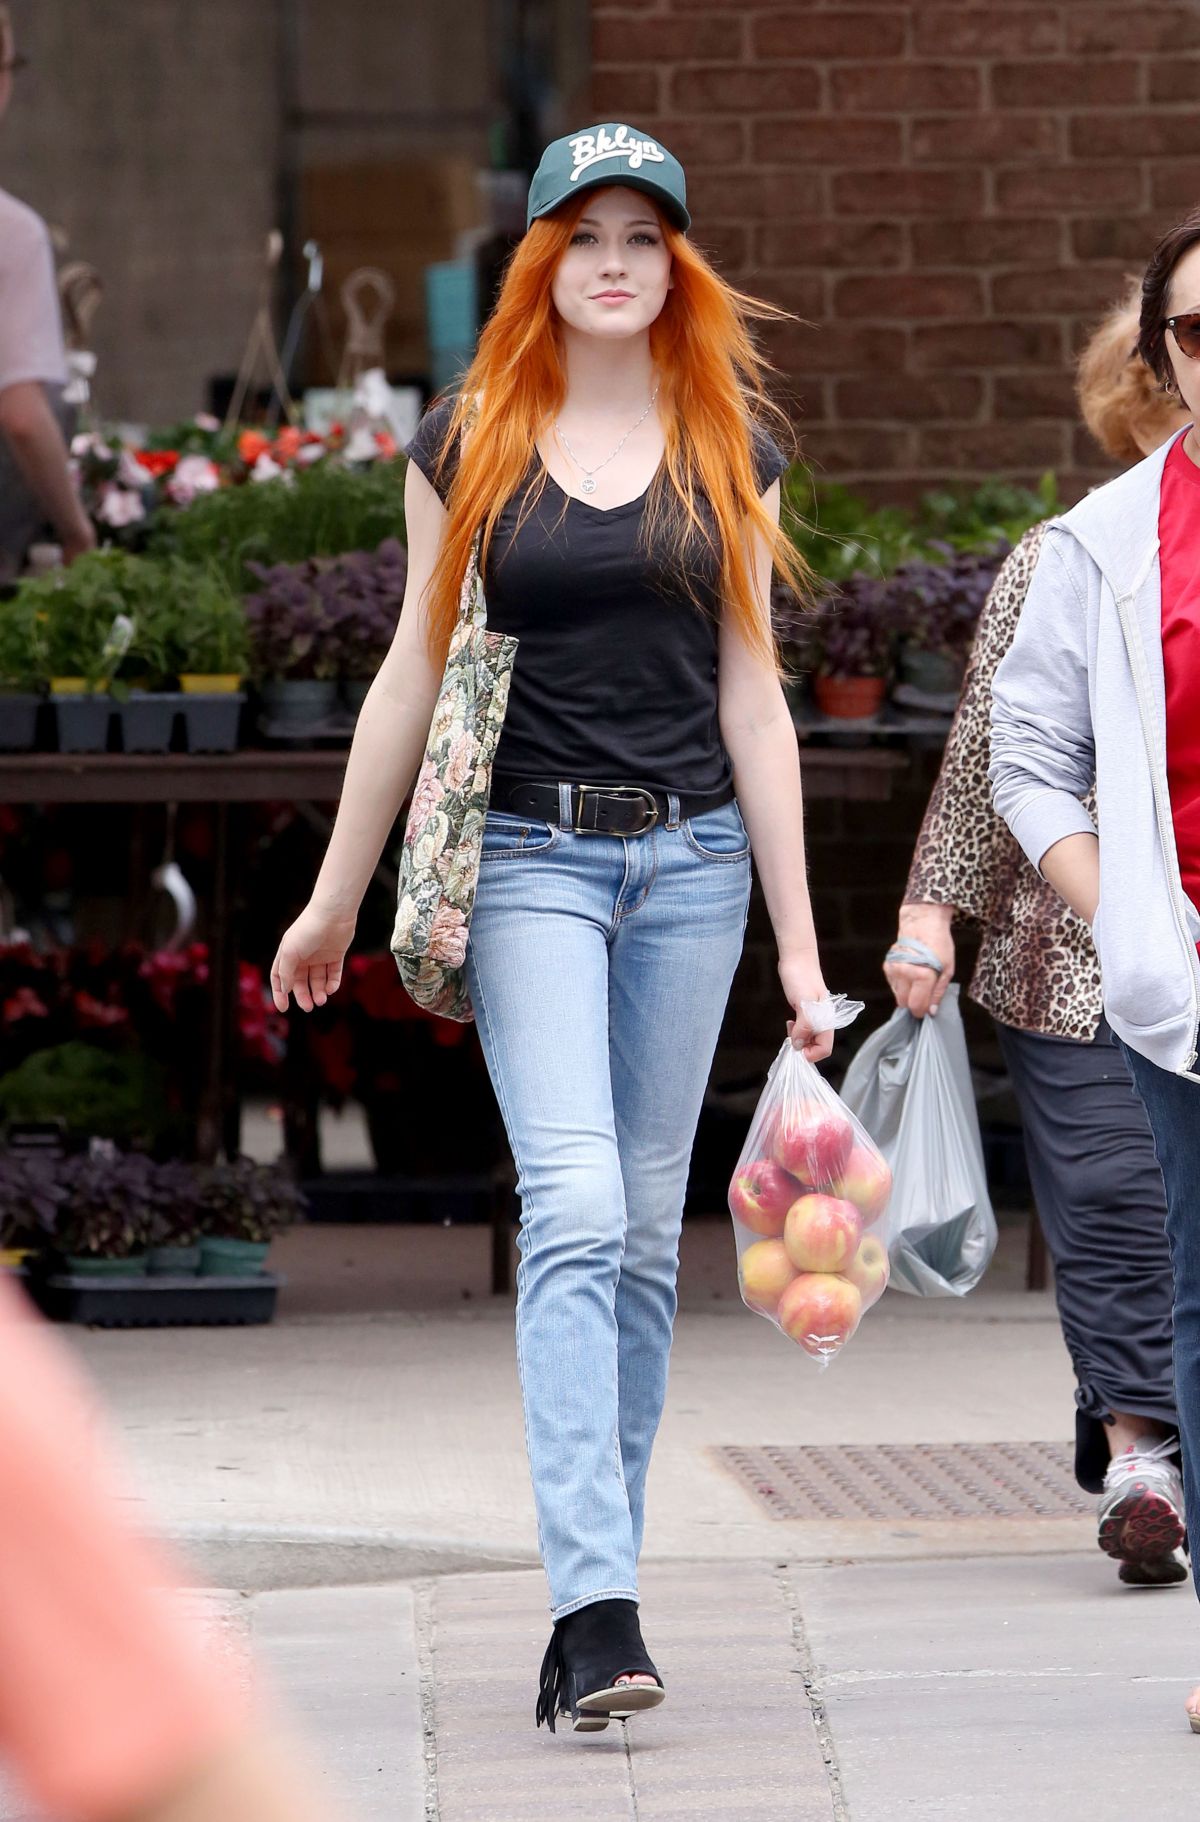 KATHERINE MCNAMARA Out and About in Toronto 05/30/2015.